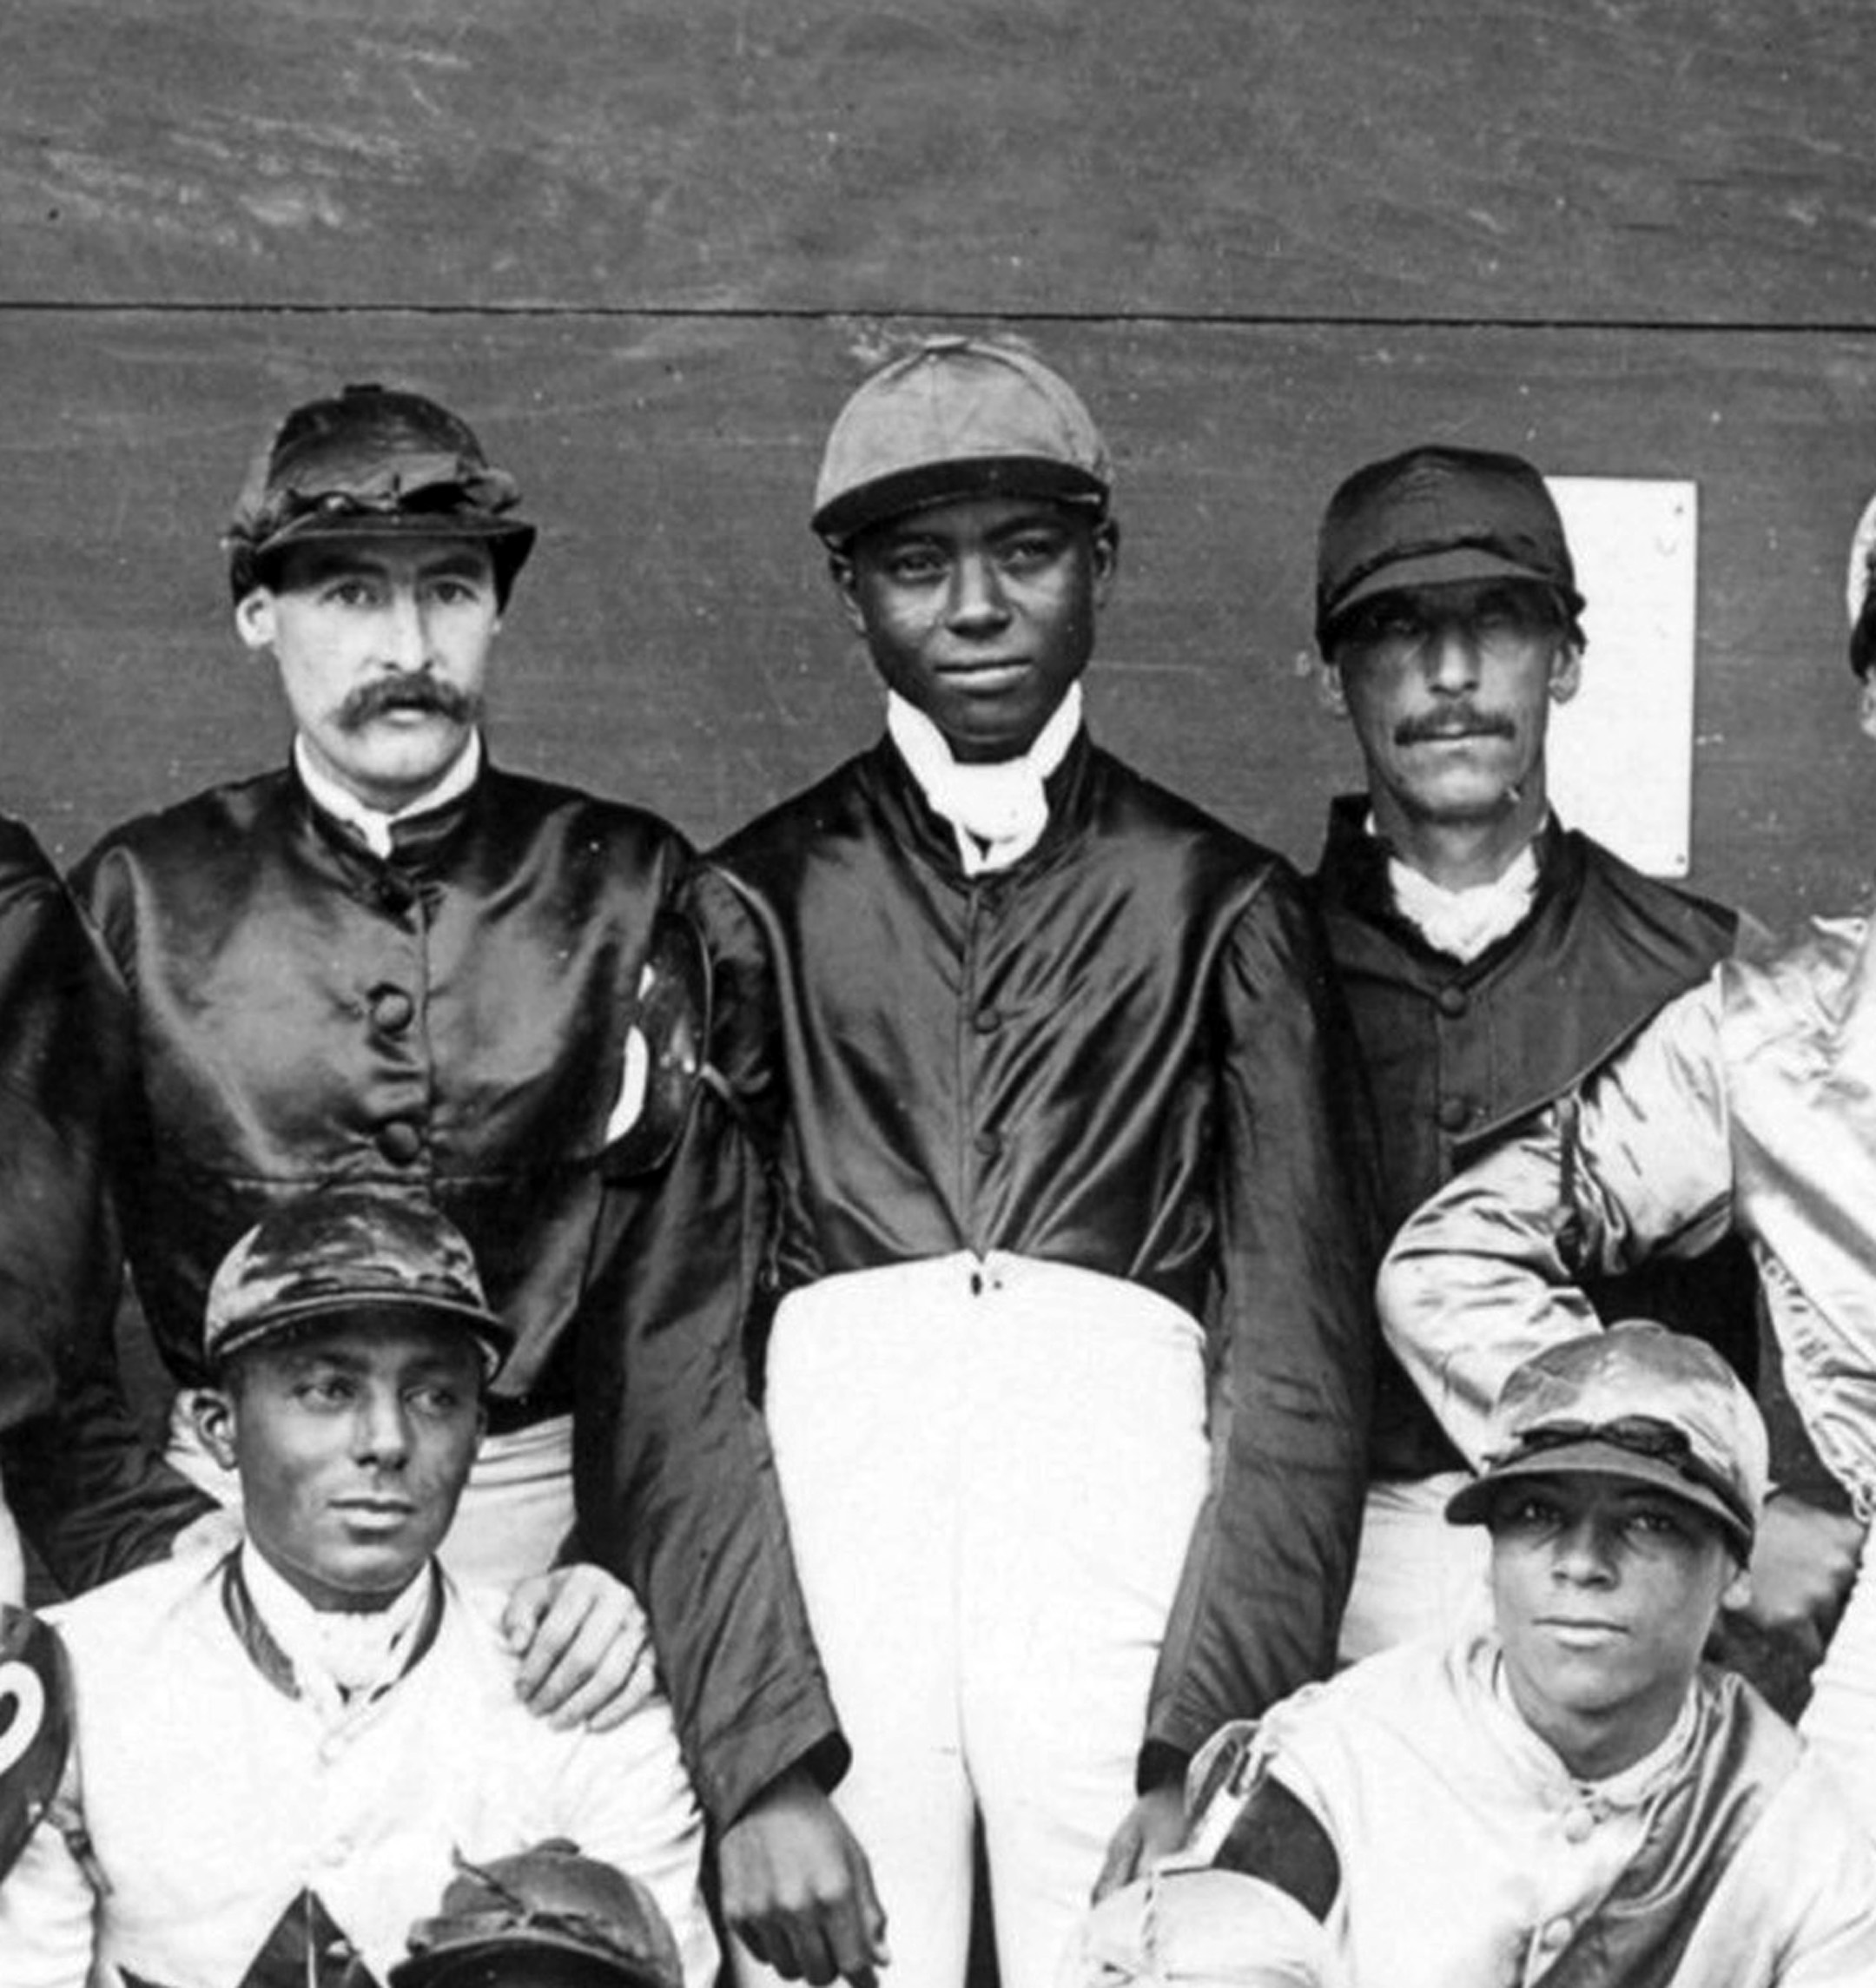 Shelby "Pike" Barnes (center) in a group portrait of a jockey colony (Keeneland Library Hemment Collection)